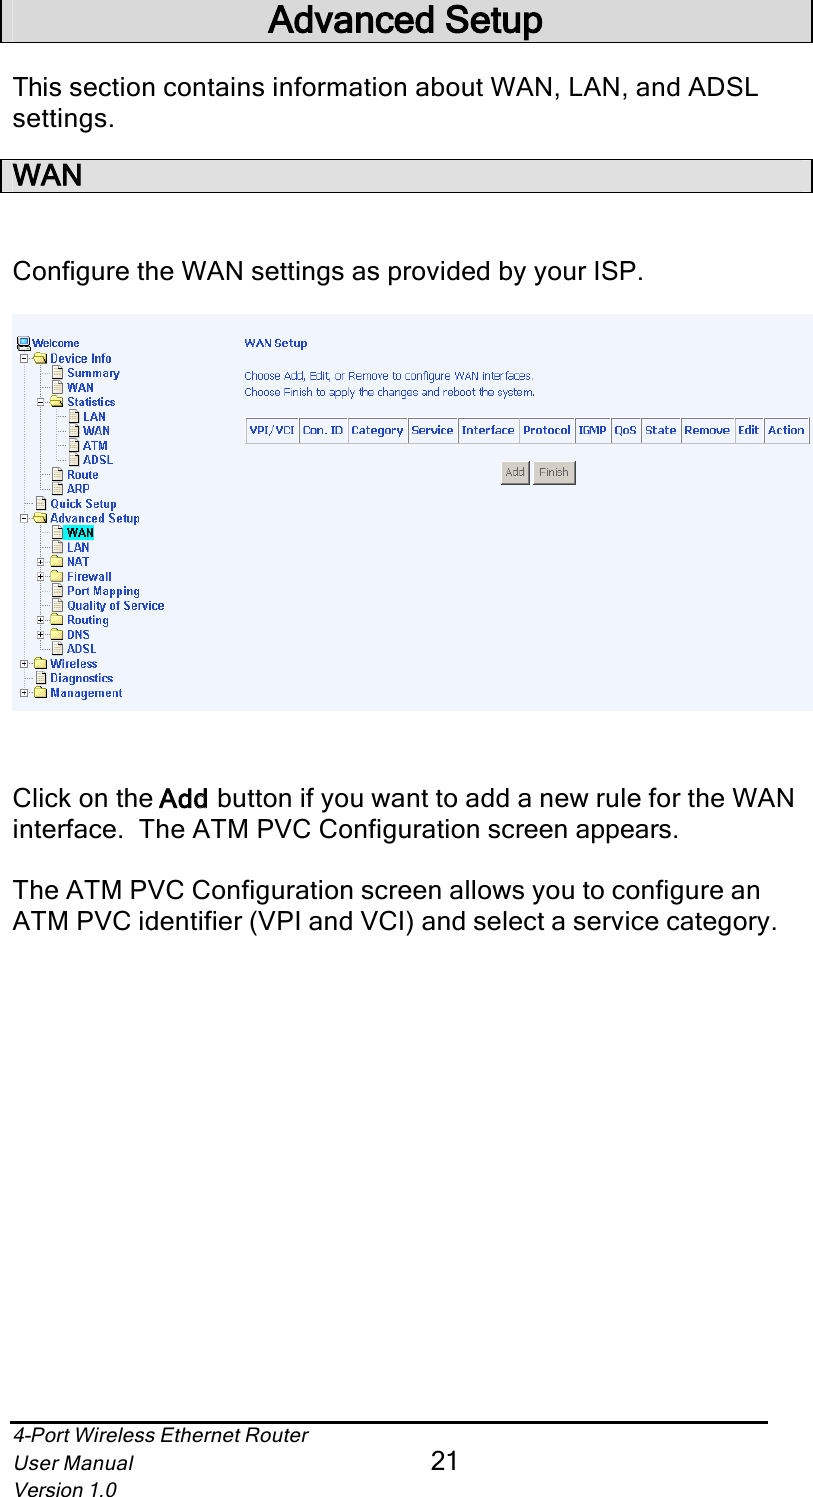 4-Port Wireless Ethernet RouterUser Manual21Version 1.0Advanced SetupThis section contains information about WAN, LAN, and ADSL settings.WANConfigure the WAN settings as provided by your ISP.Click on the Addd button if you want to add a new rule for the WAN interface.  The ATM PVC Configuration screen appears. The ATM PVC Configuration screen allows you to configure an ATM PVC identifier (VPI and VCI) and select a service category. 